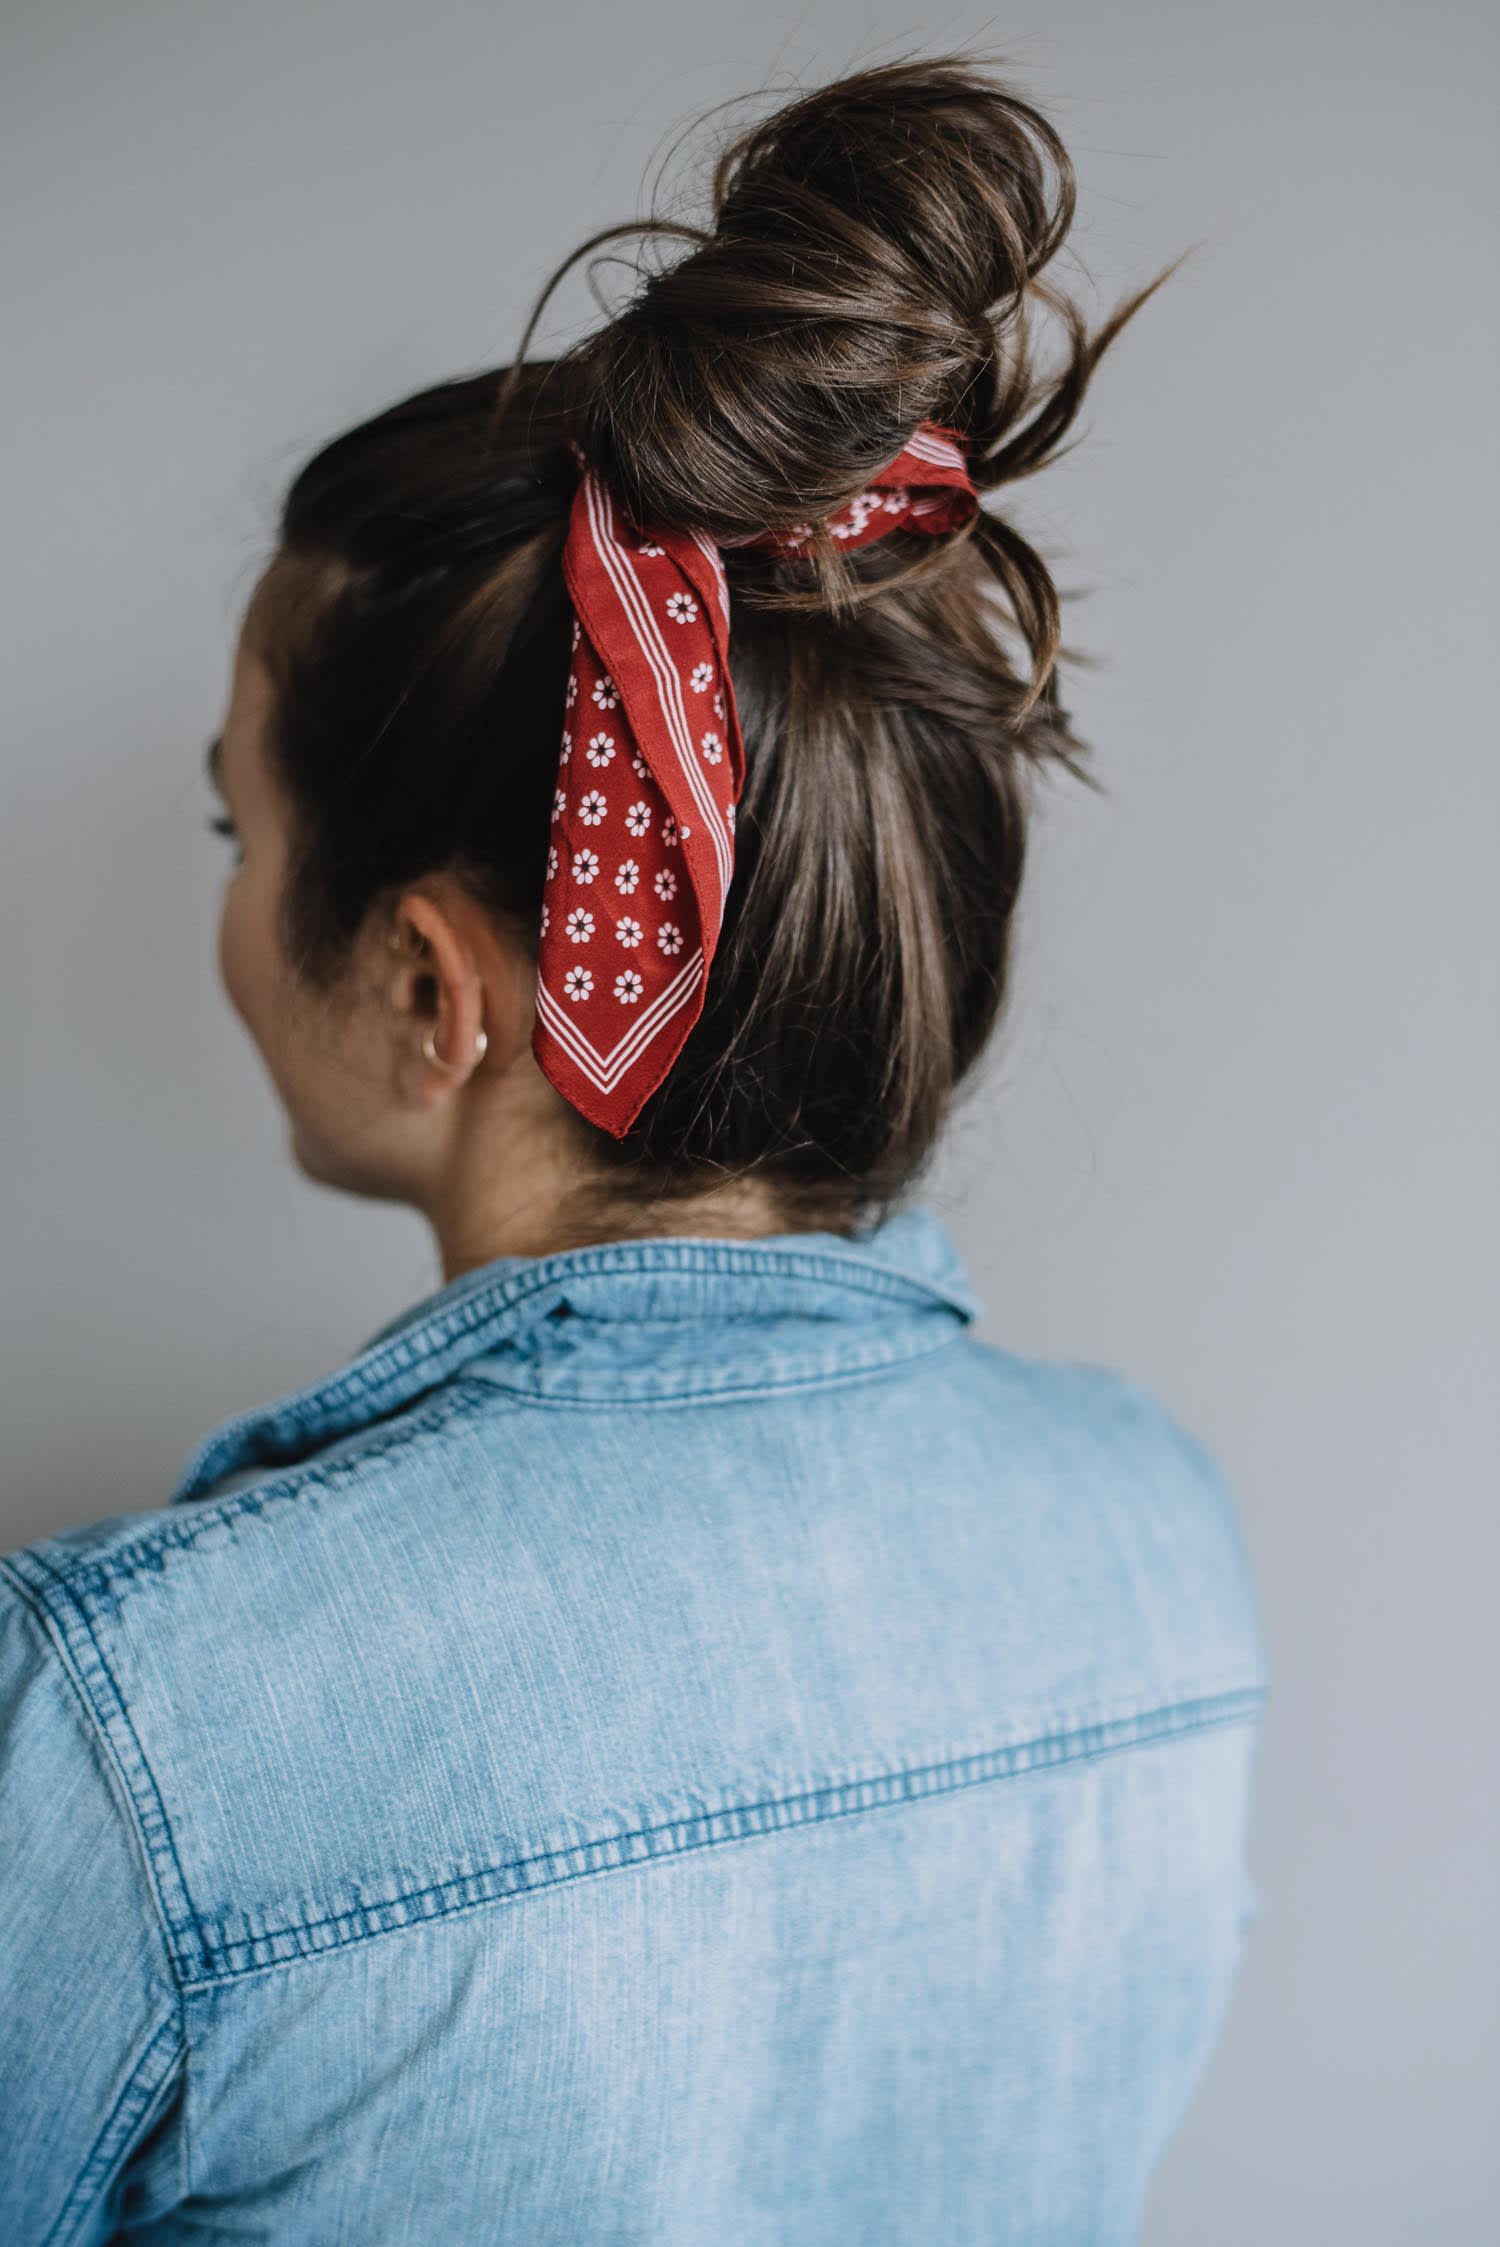 How to wear bandanas in your hair